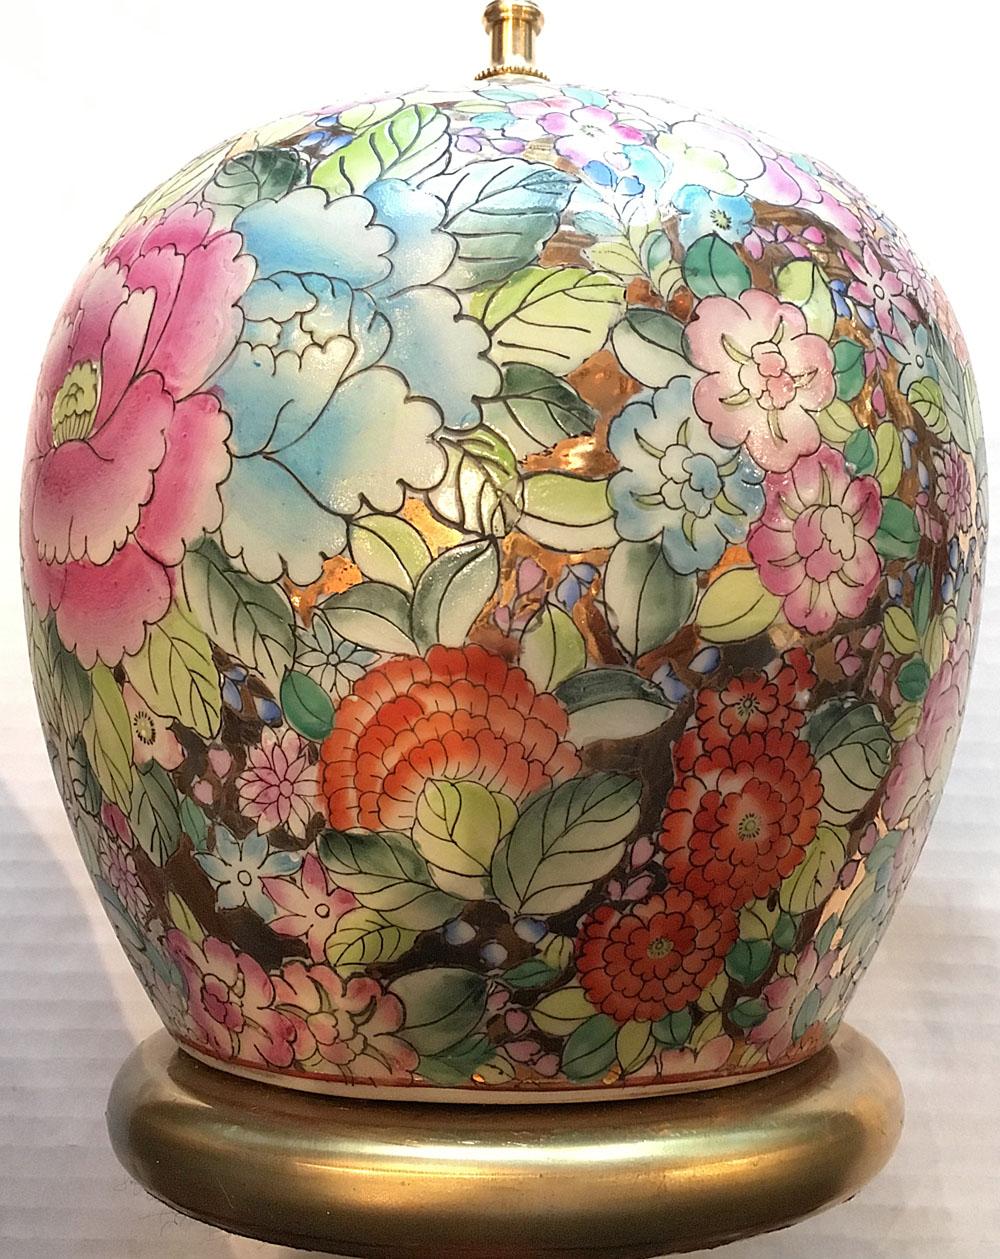 A circa 1950s Chinese porcelain table lamp with floral decoration on a gold background.